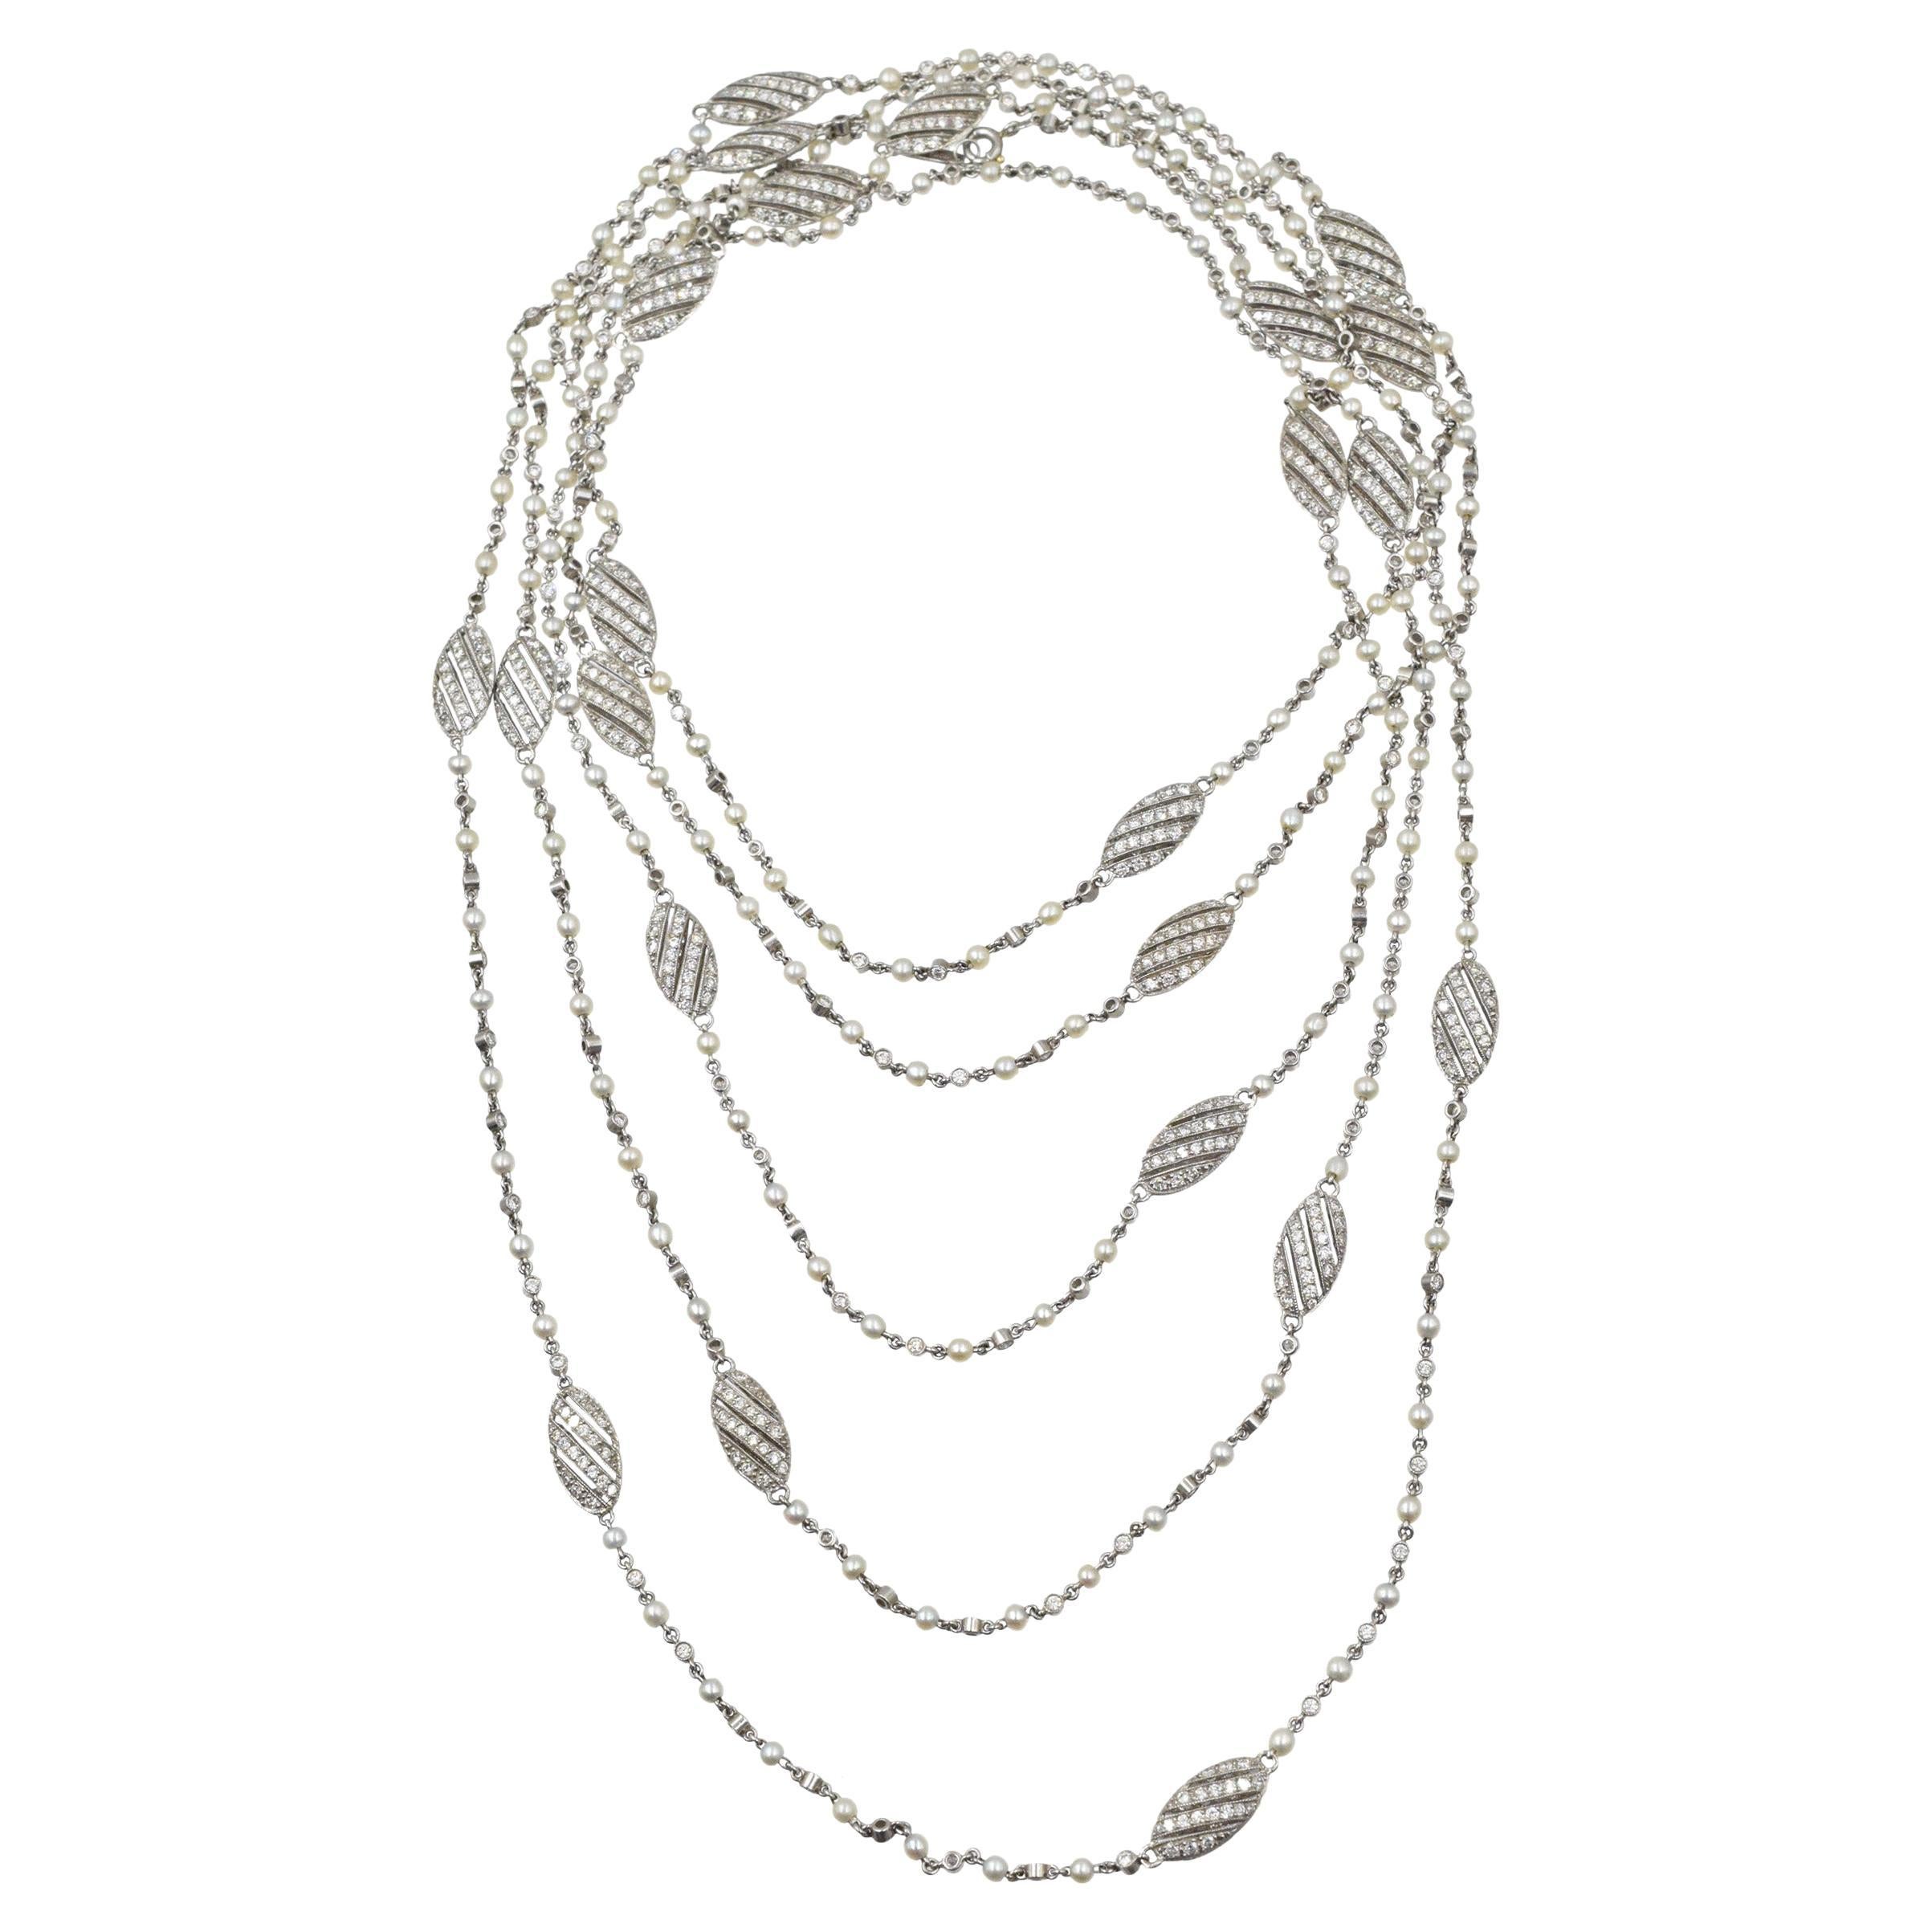 Tiffany & Co. Diamond and Seed Pearl Long Chain in Platinum